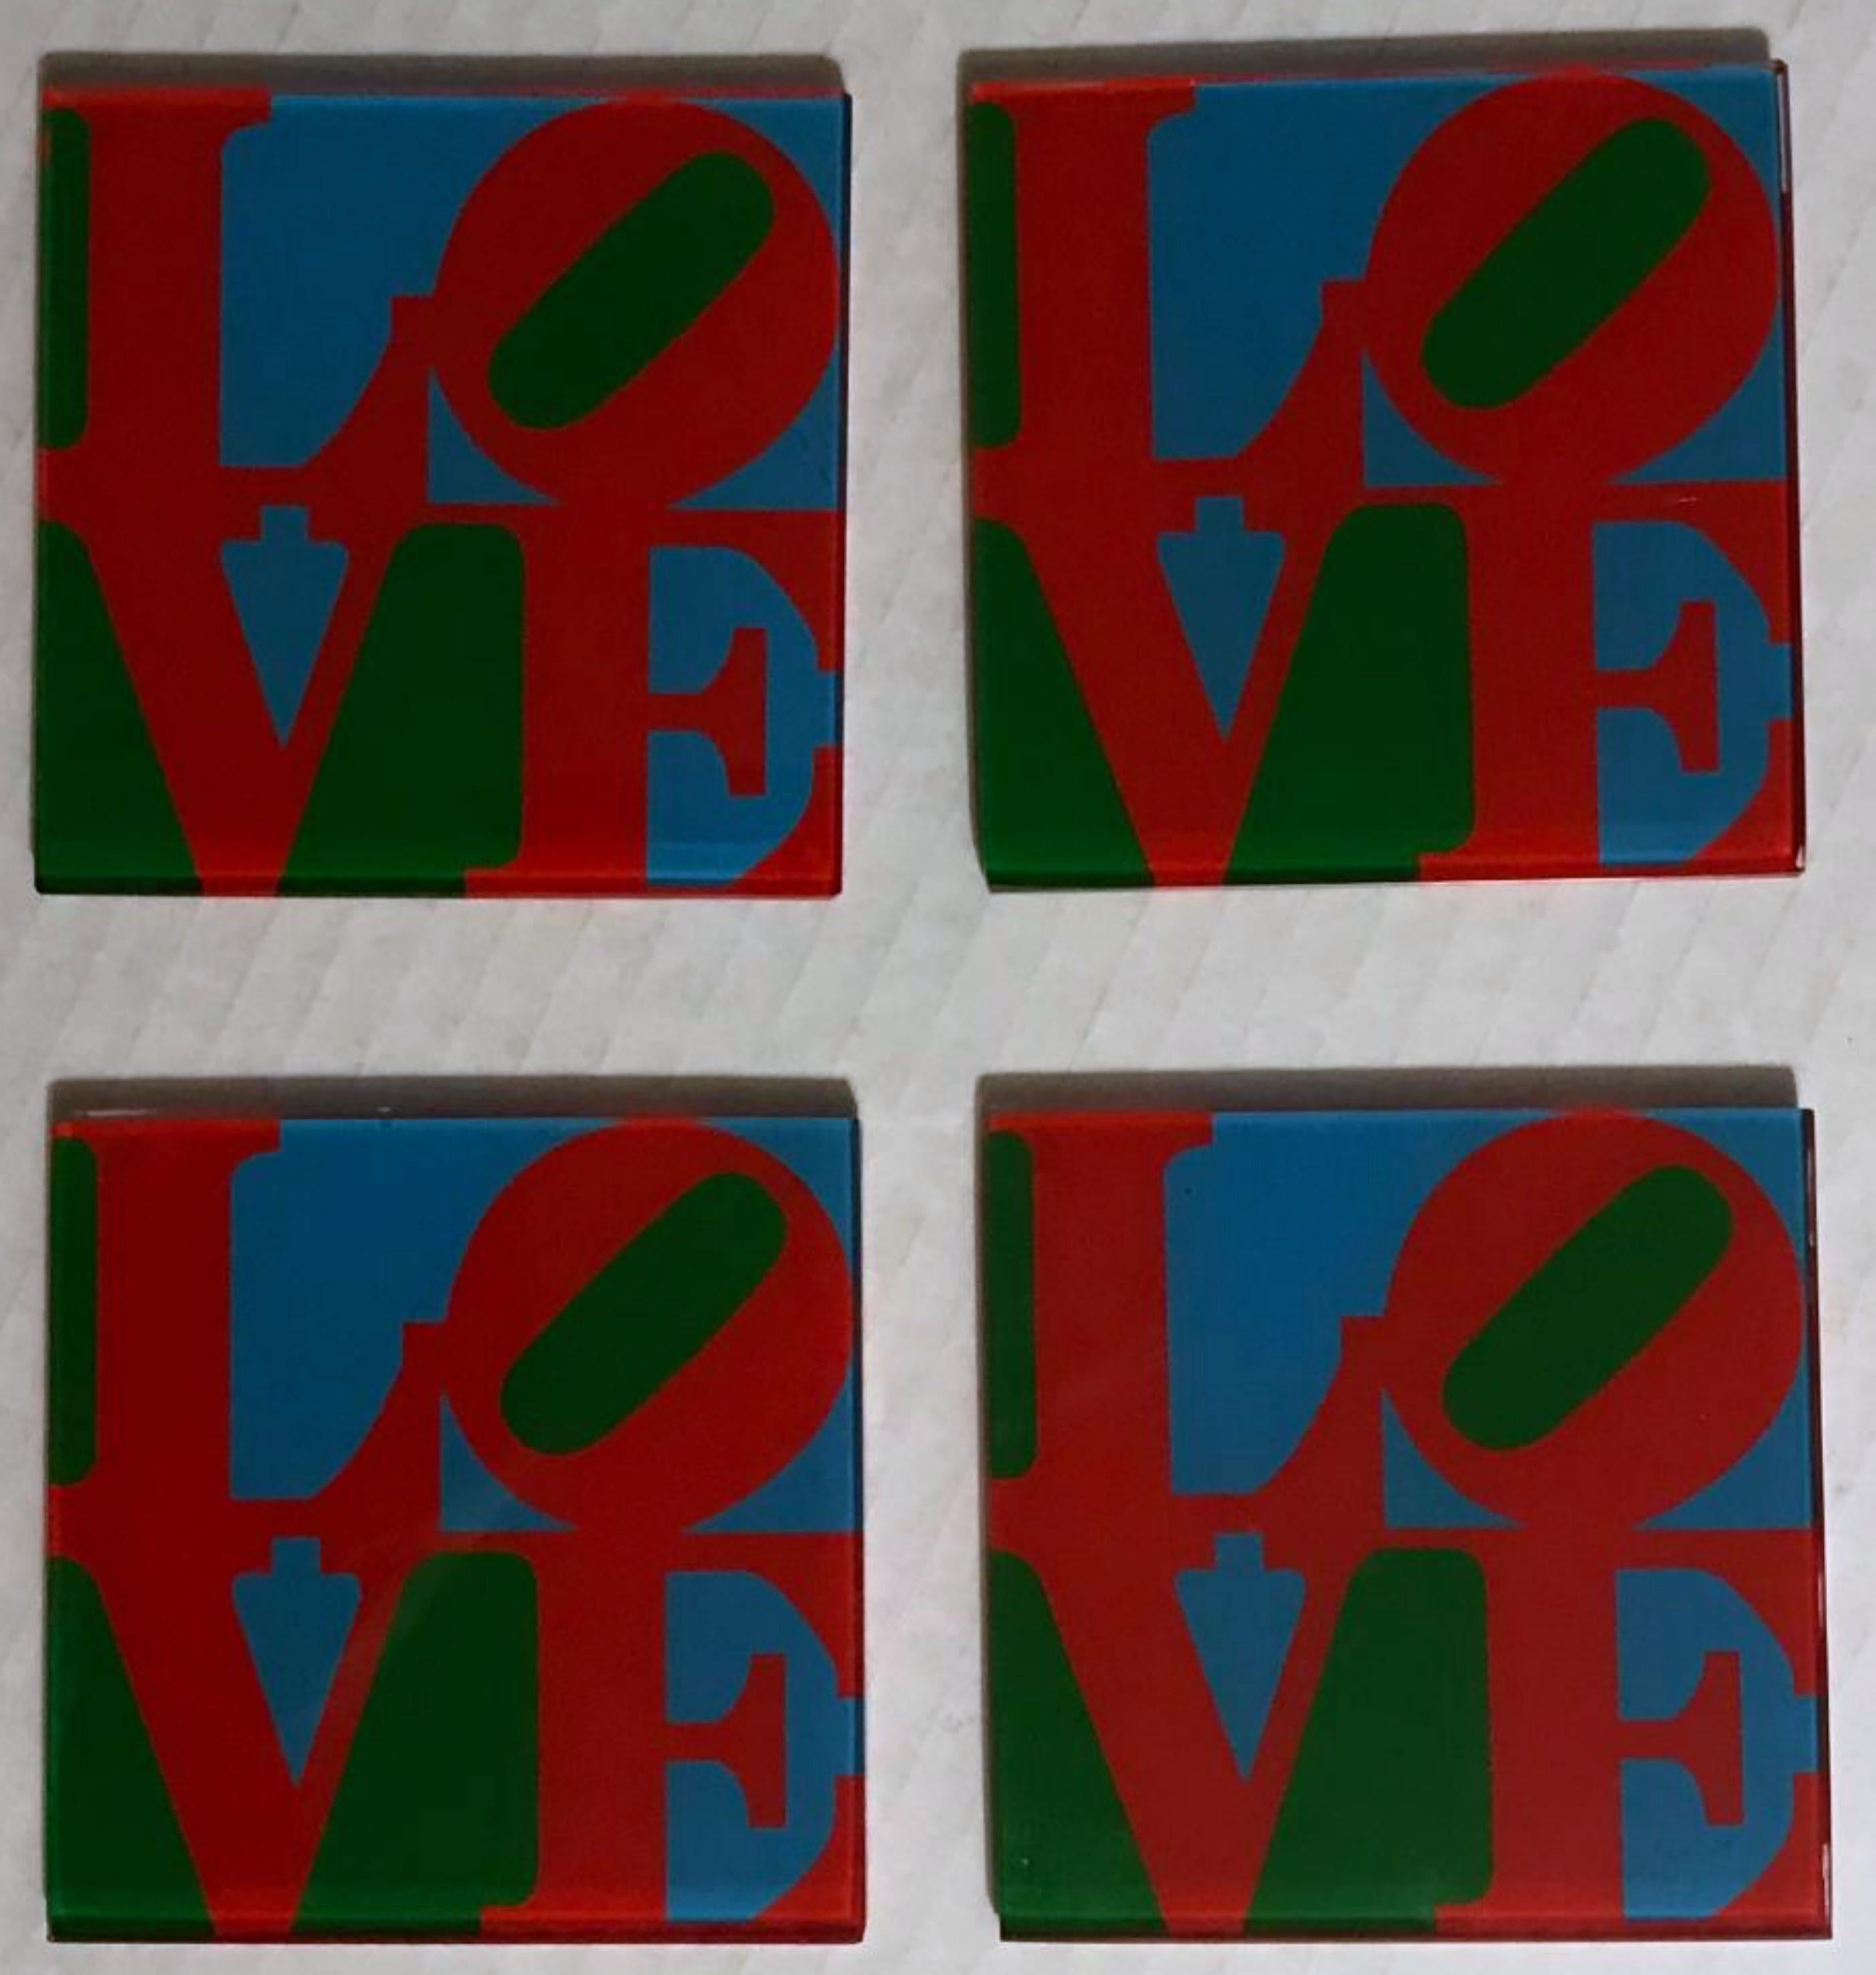 Set of Four Glass Coasters (official; stamped by the Indianapolis Museum of Art) - Mixed Media Art by Robert Indiana